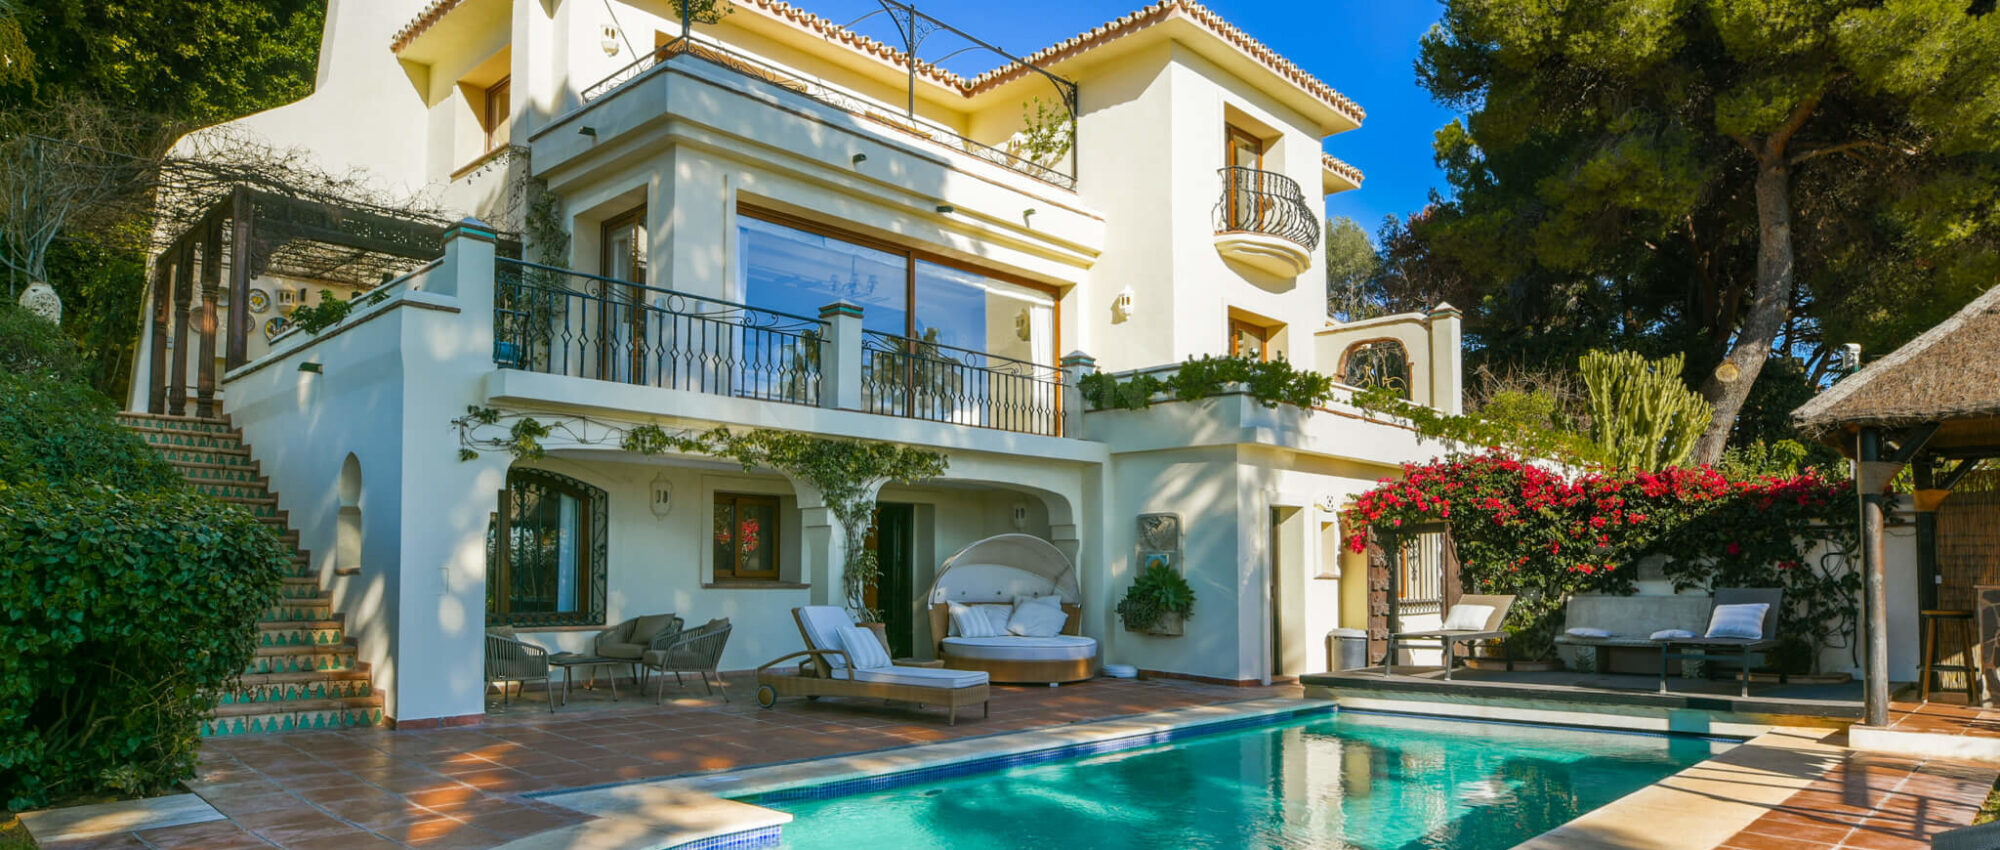 Exceptional family home in Rio Real, Marbella